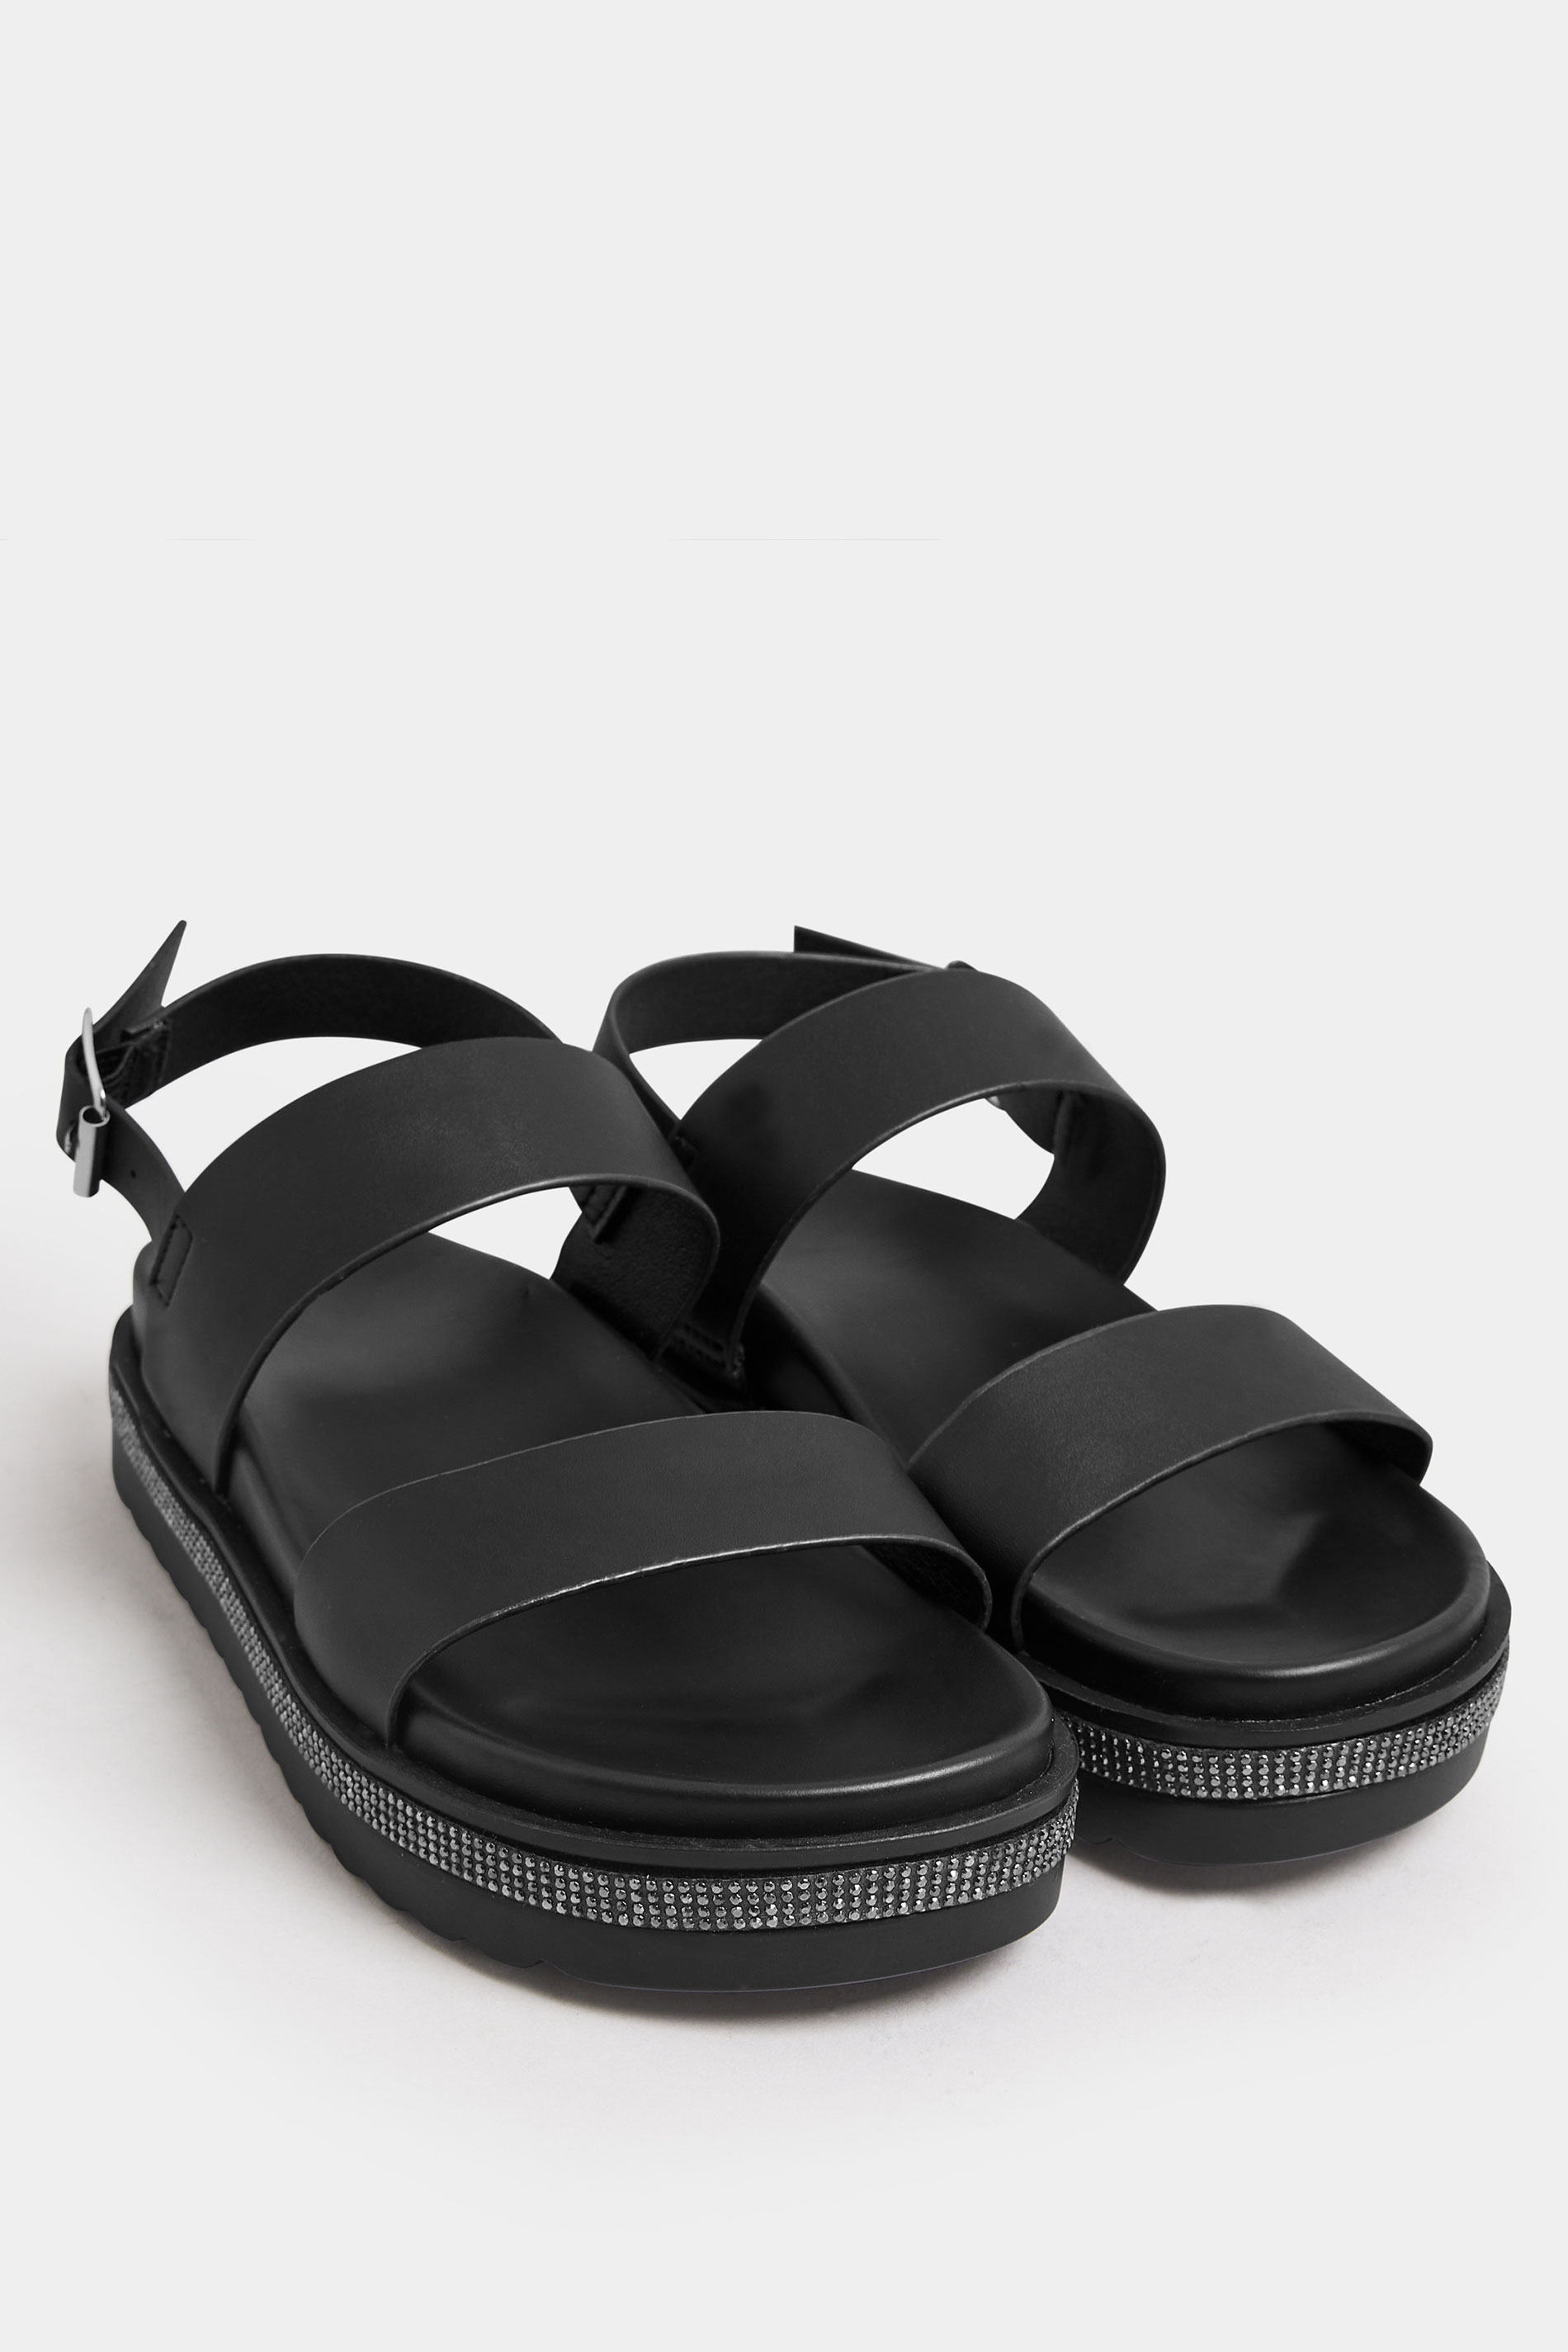 Black Sparkle Flatform Sandals In Extra Wide EEE Fit | Yours Clothing 2